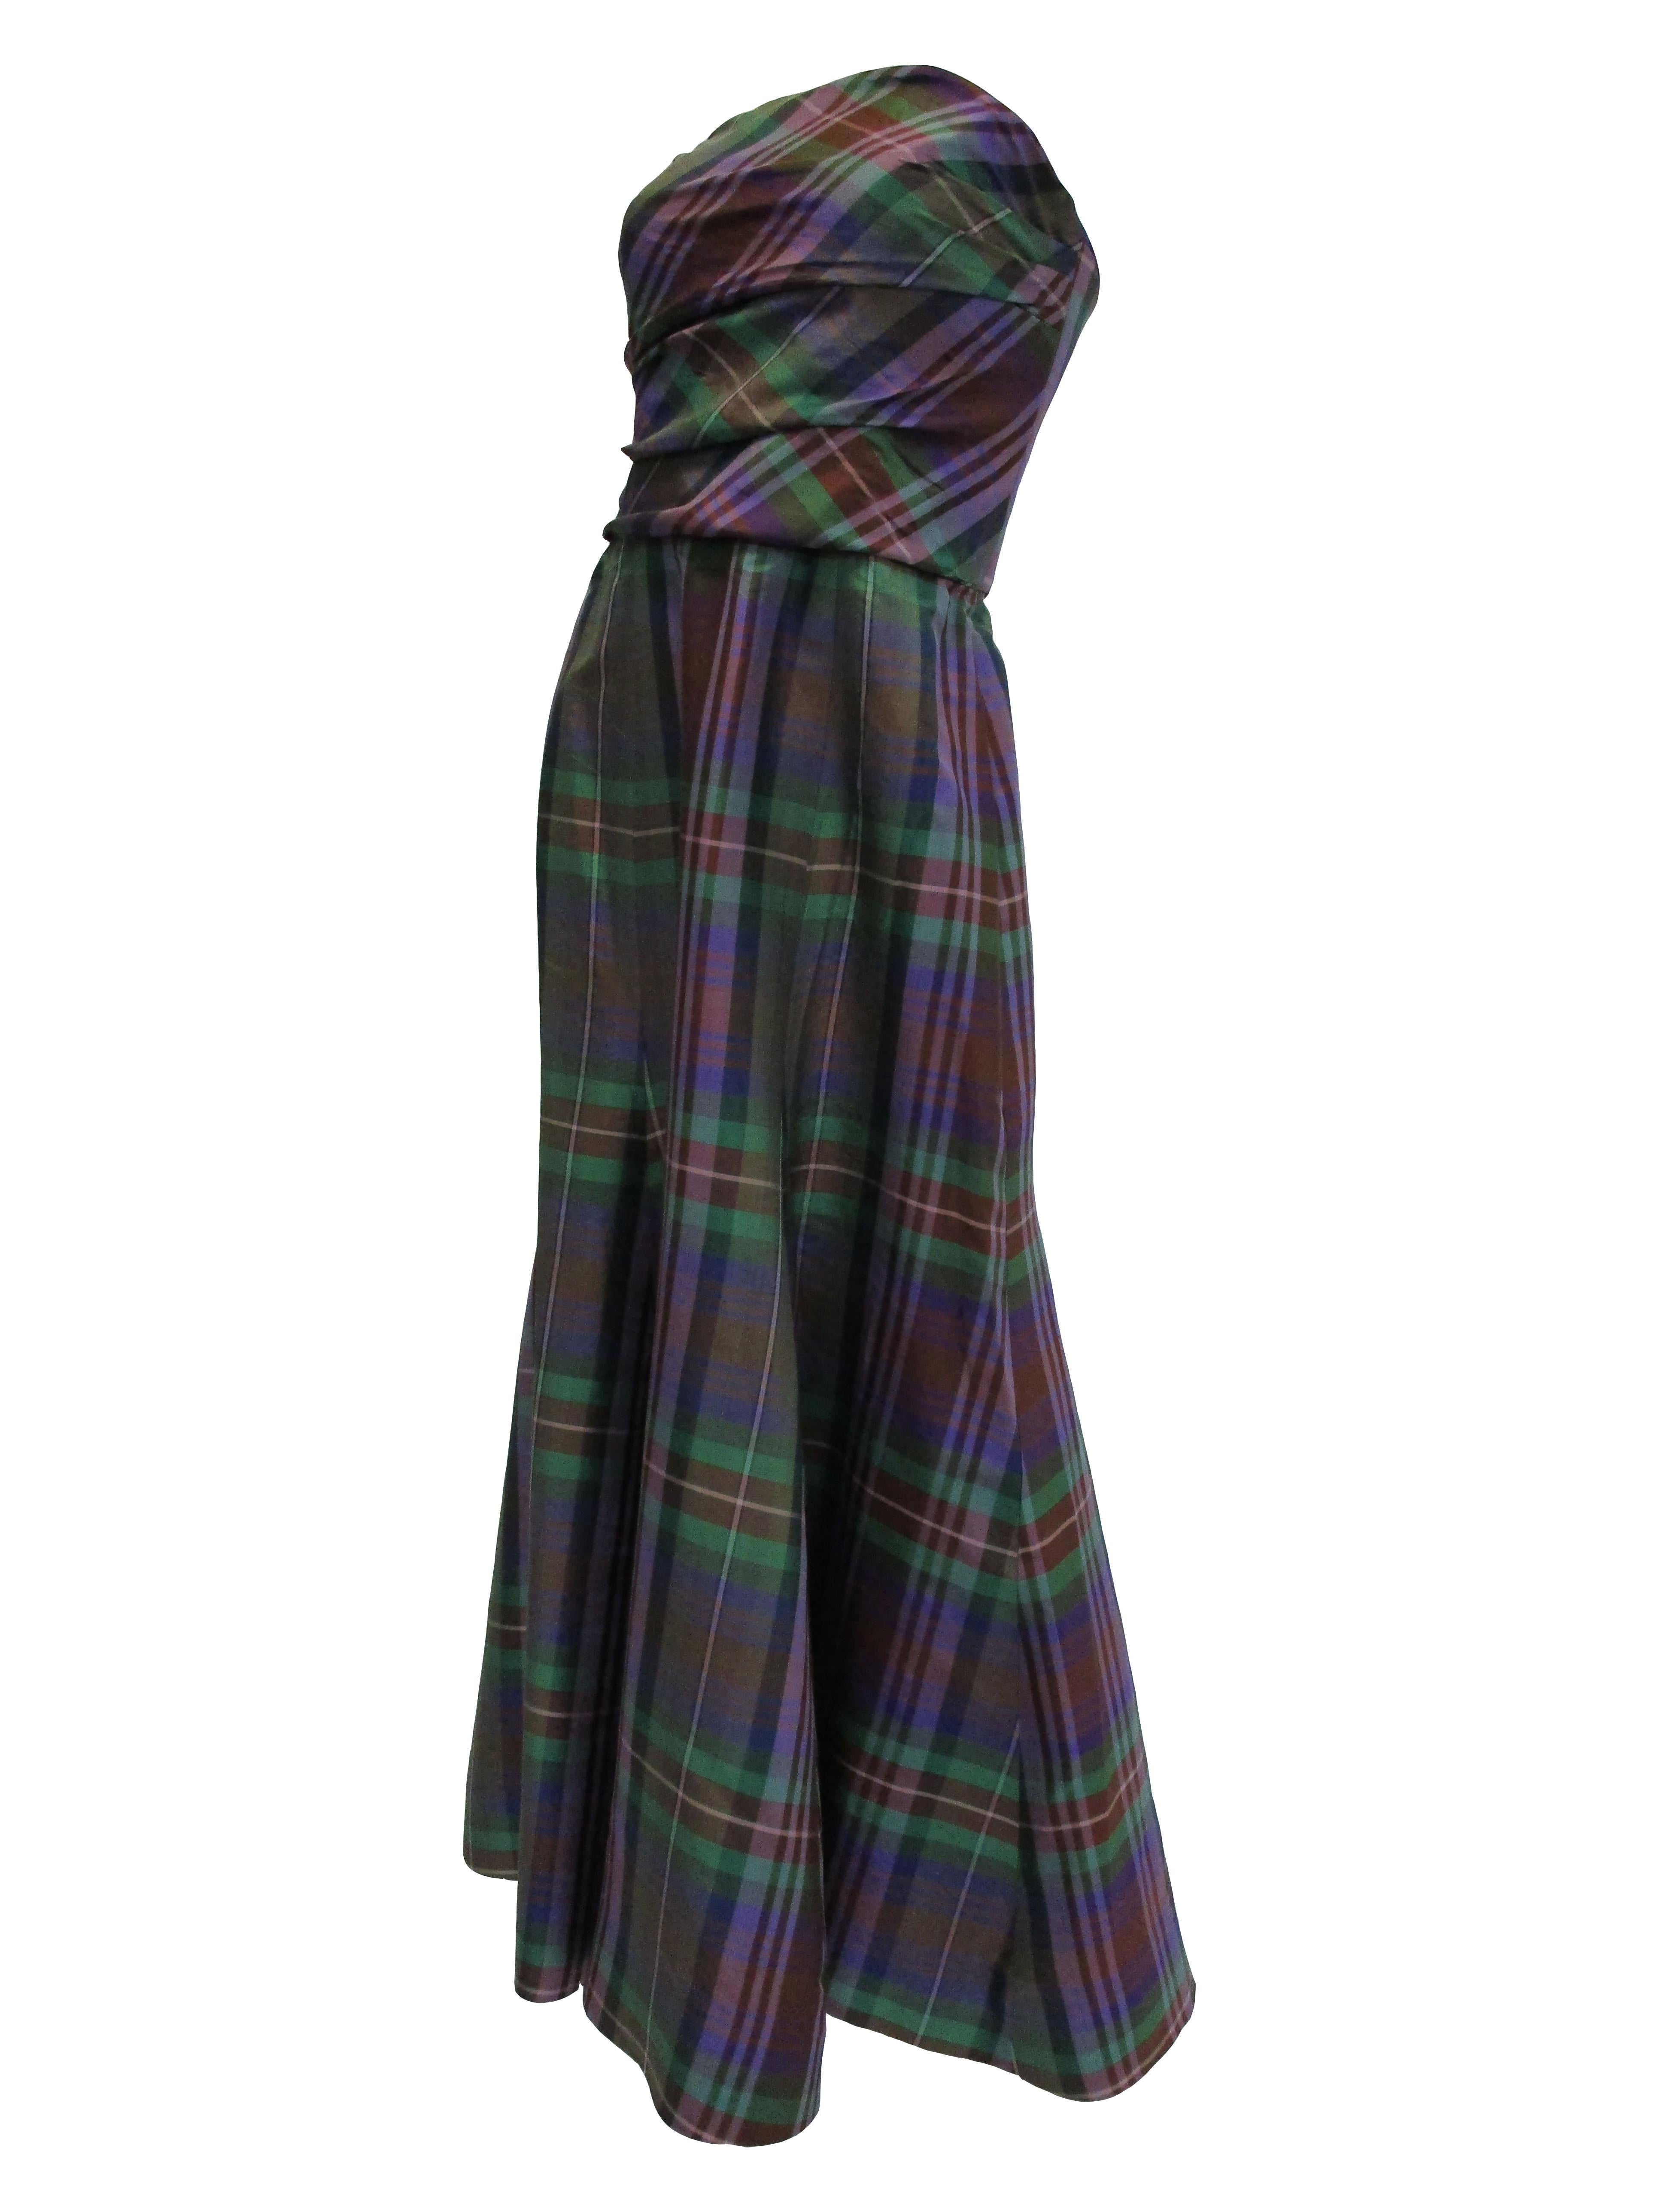 
Captivating evening gown by Catherine Regehr. The fabric is a beautiful satin plaid that gives an iridescent effect in sunlight! the dress fits snug as it wraps around the bodice and releases into an A-Line silhouette. It features a long scarf that